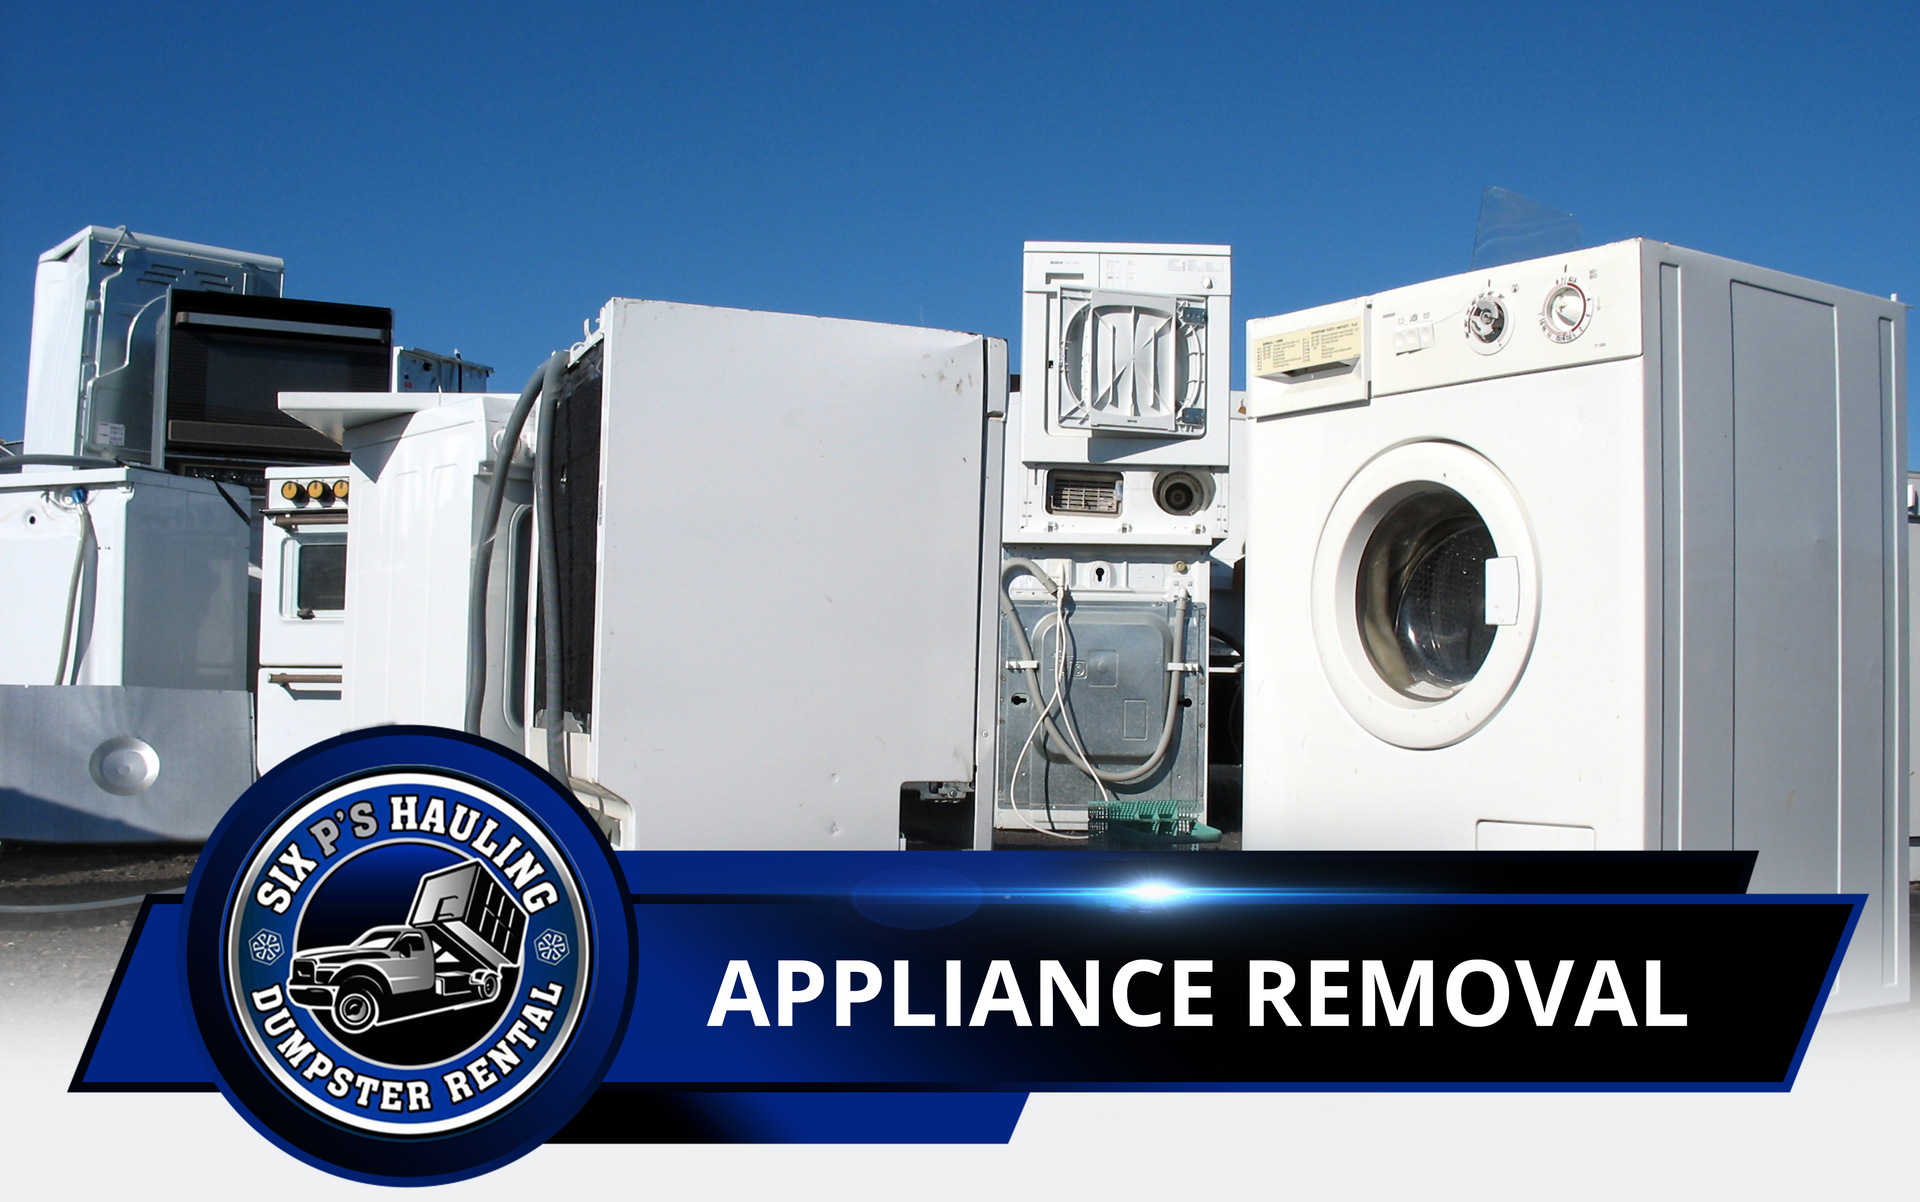 Appliance Removal in Claremont, CA